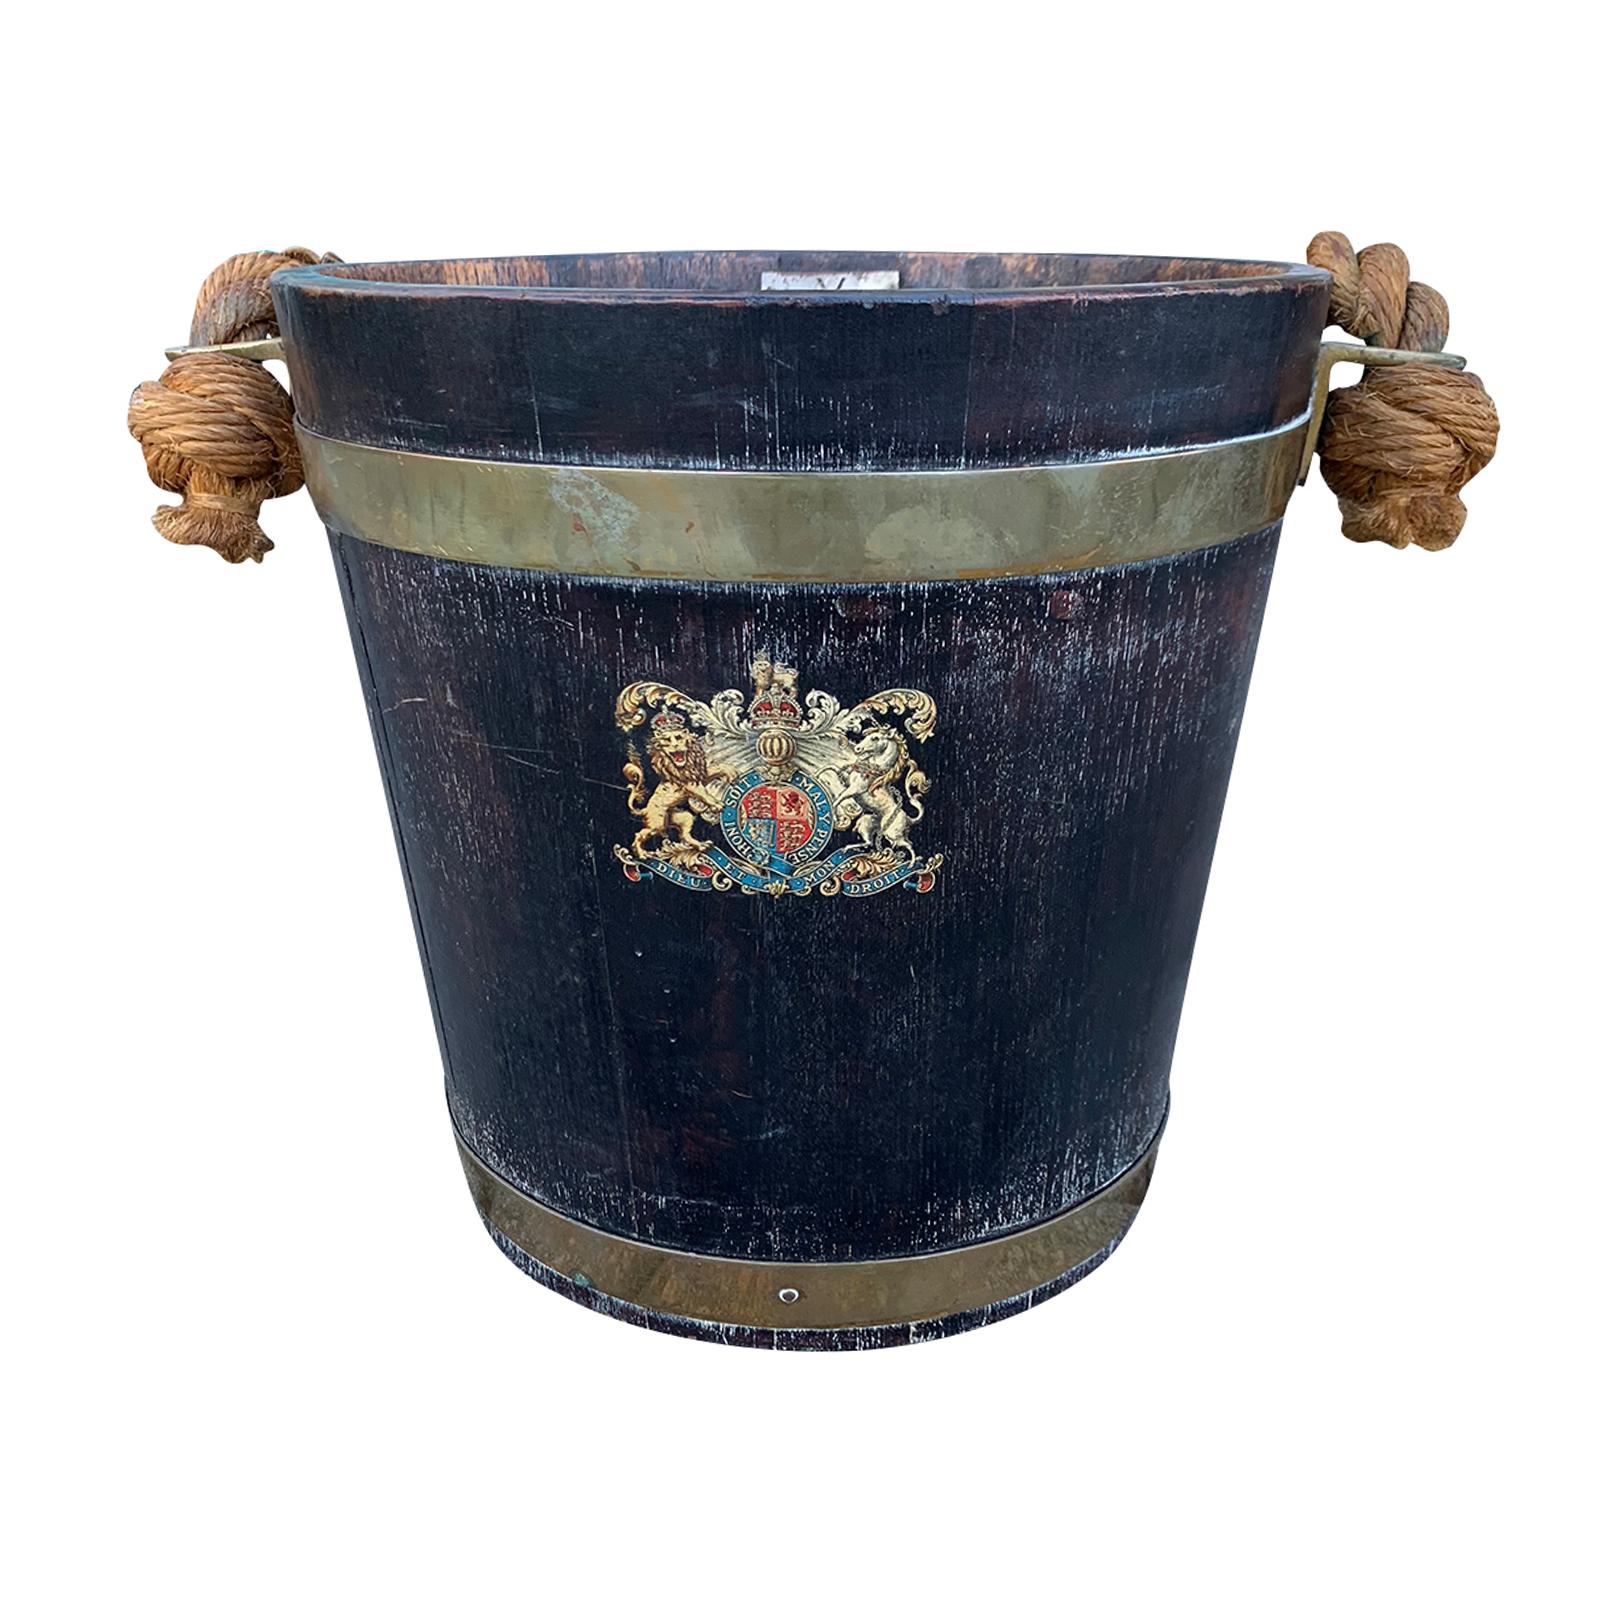 19th-20th Century Wooden Bucket with Rope Handle, Crest Detail